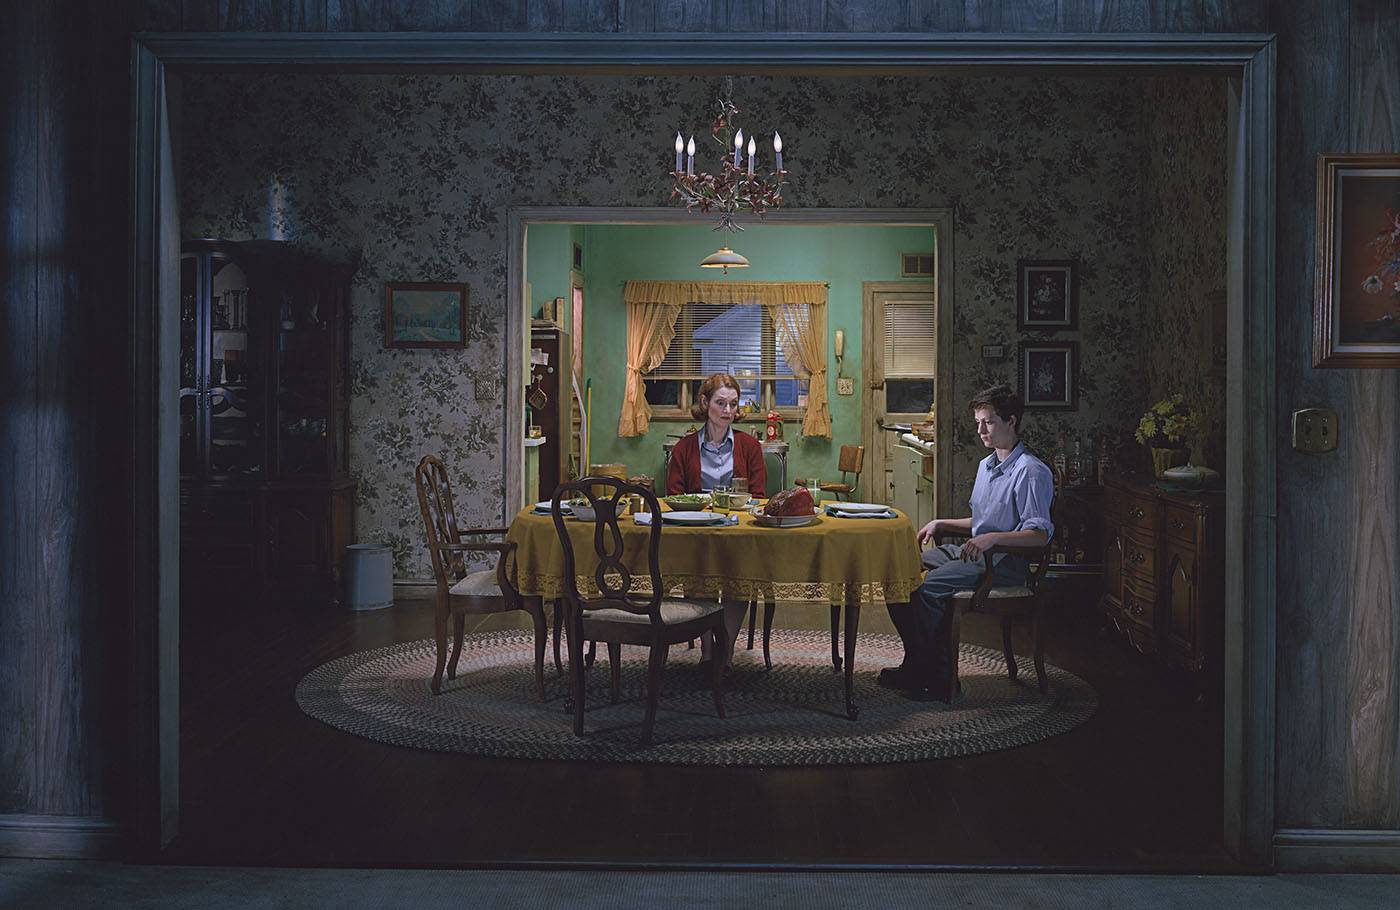 Gregory Crewdson, Untitled (Sunday Roast) From the series: Beneath the Roses, 2003-2008 (ALBERTINA, Wien. Permanent loan - Kerry Propper, Art Invest II LLC © Gregory Crewdson)